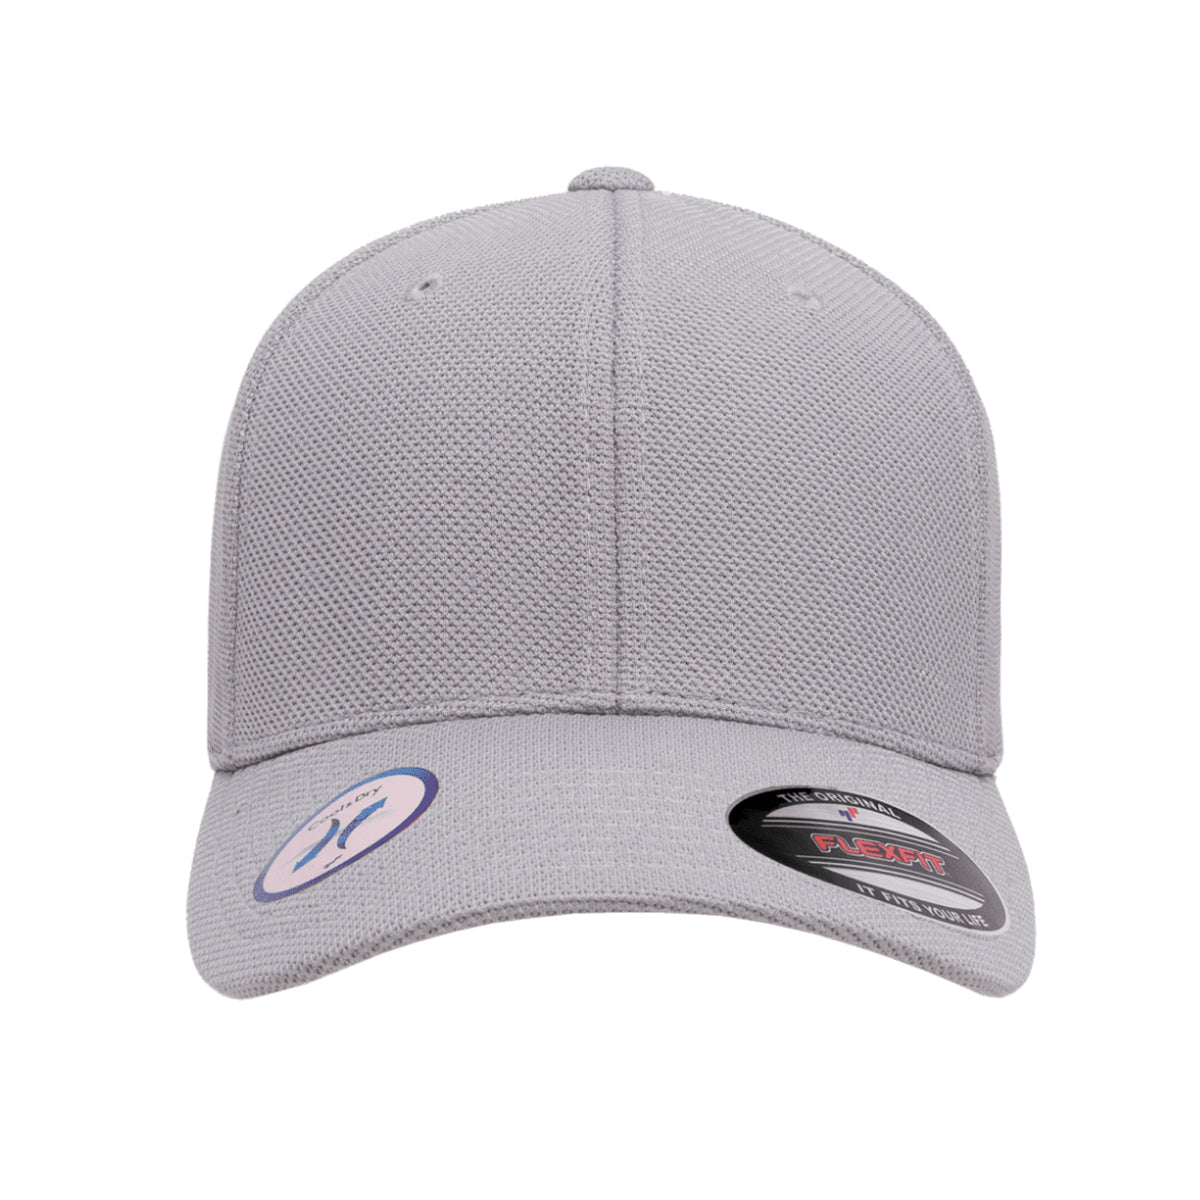 Wholesale & Yupoong – | Dry Cool Flexfit 2040USA Caps Flexfit Caps, Mesh Billed Flexfit Flat Cool & Dry Pique